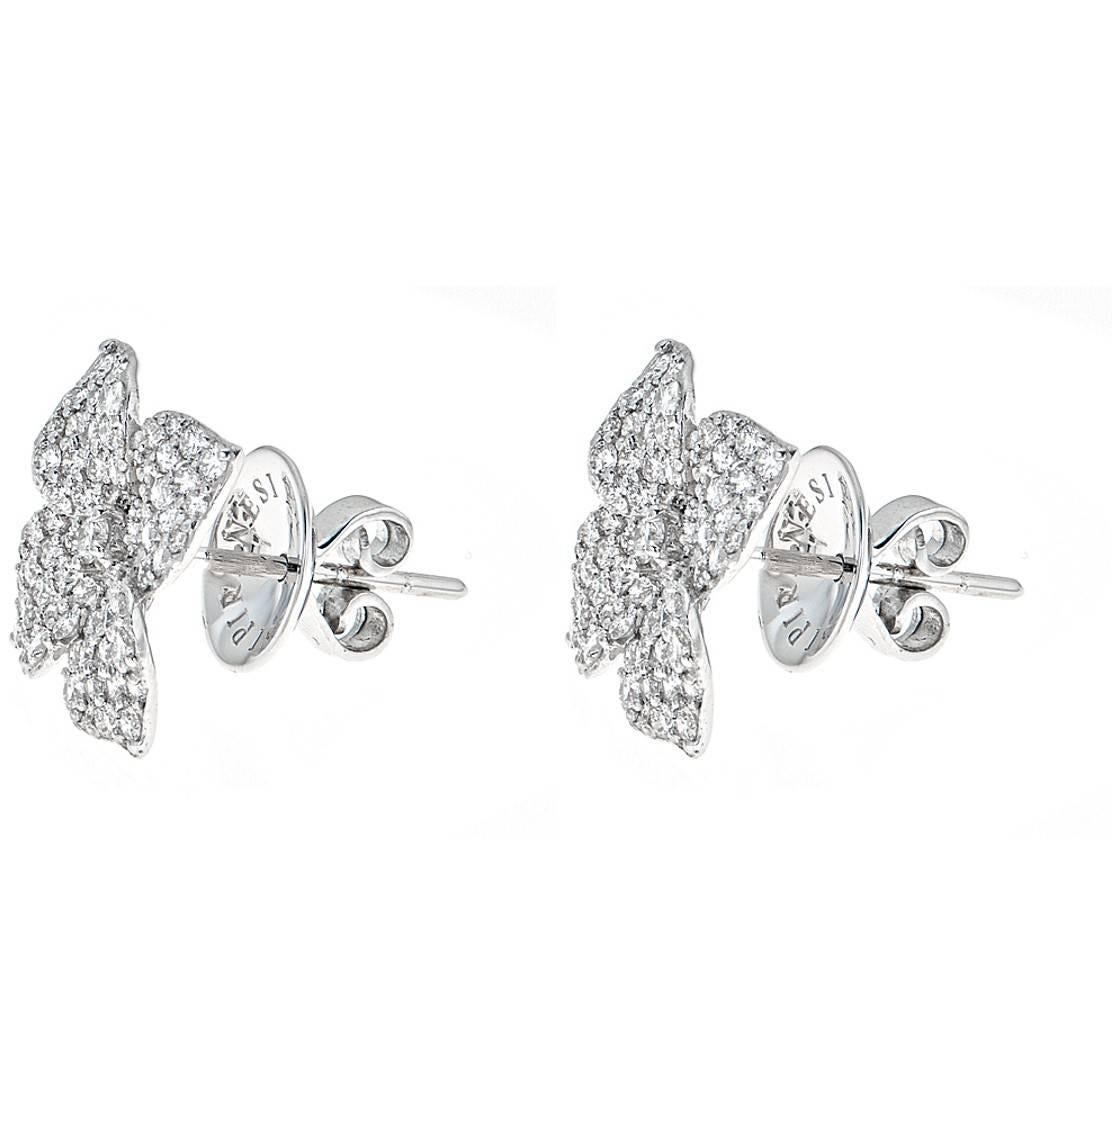 Round Cut 1.50 Carat Pave Diamond White Gold Flower Earrings For Sale